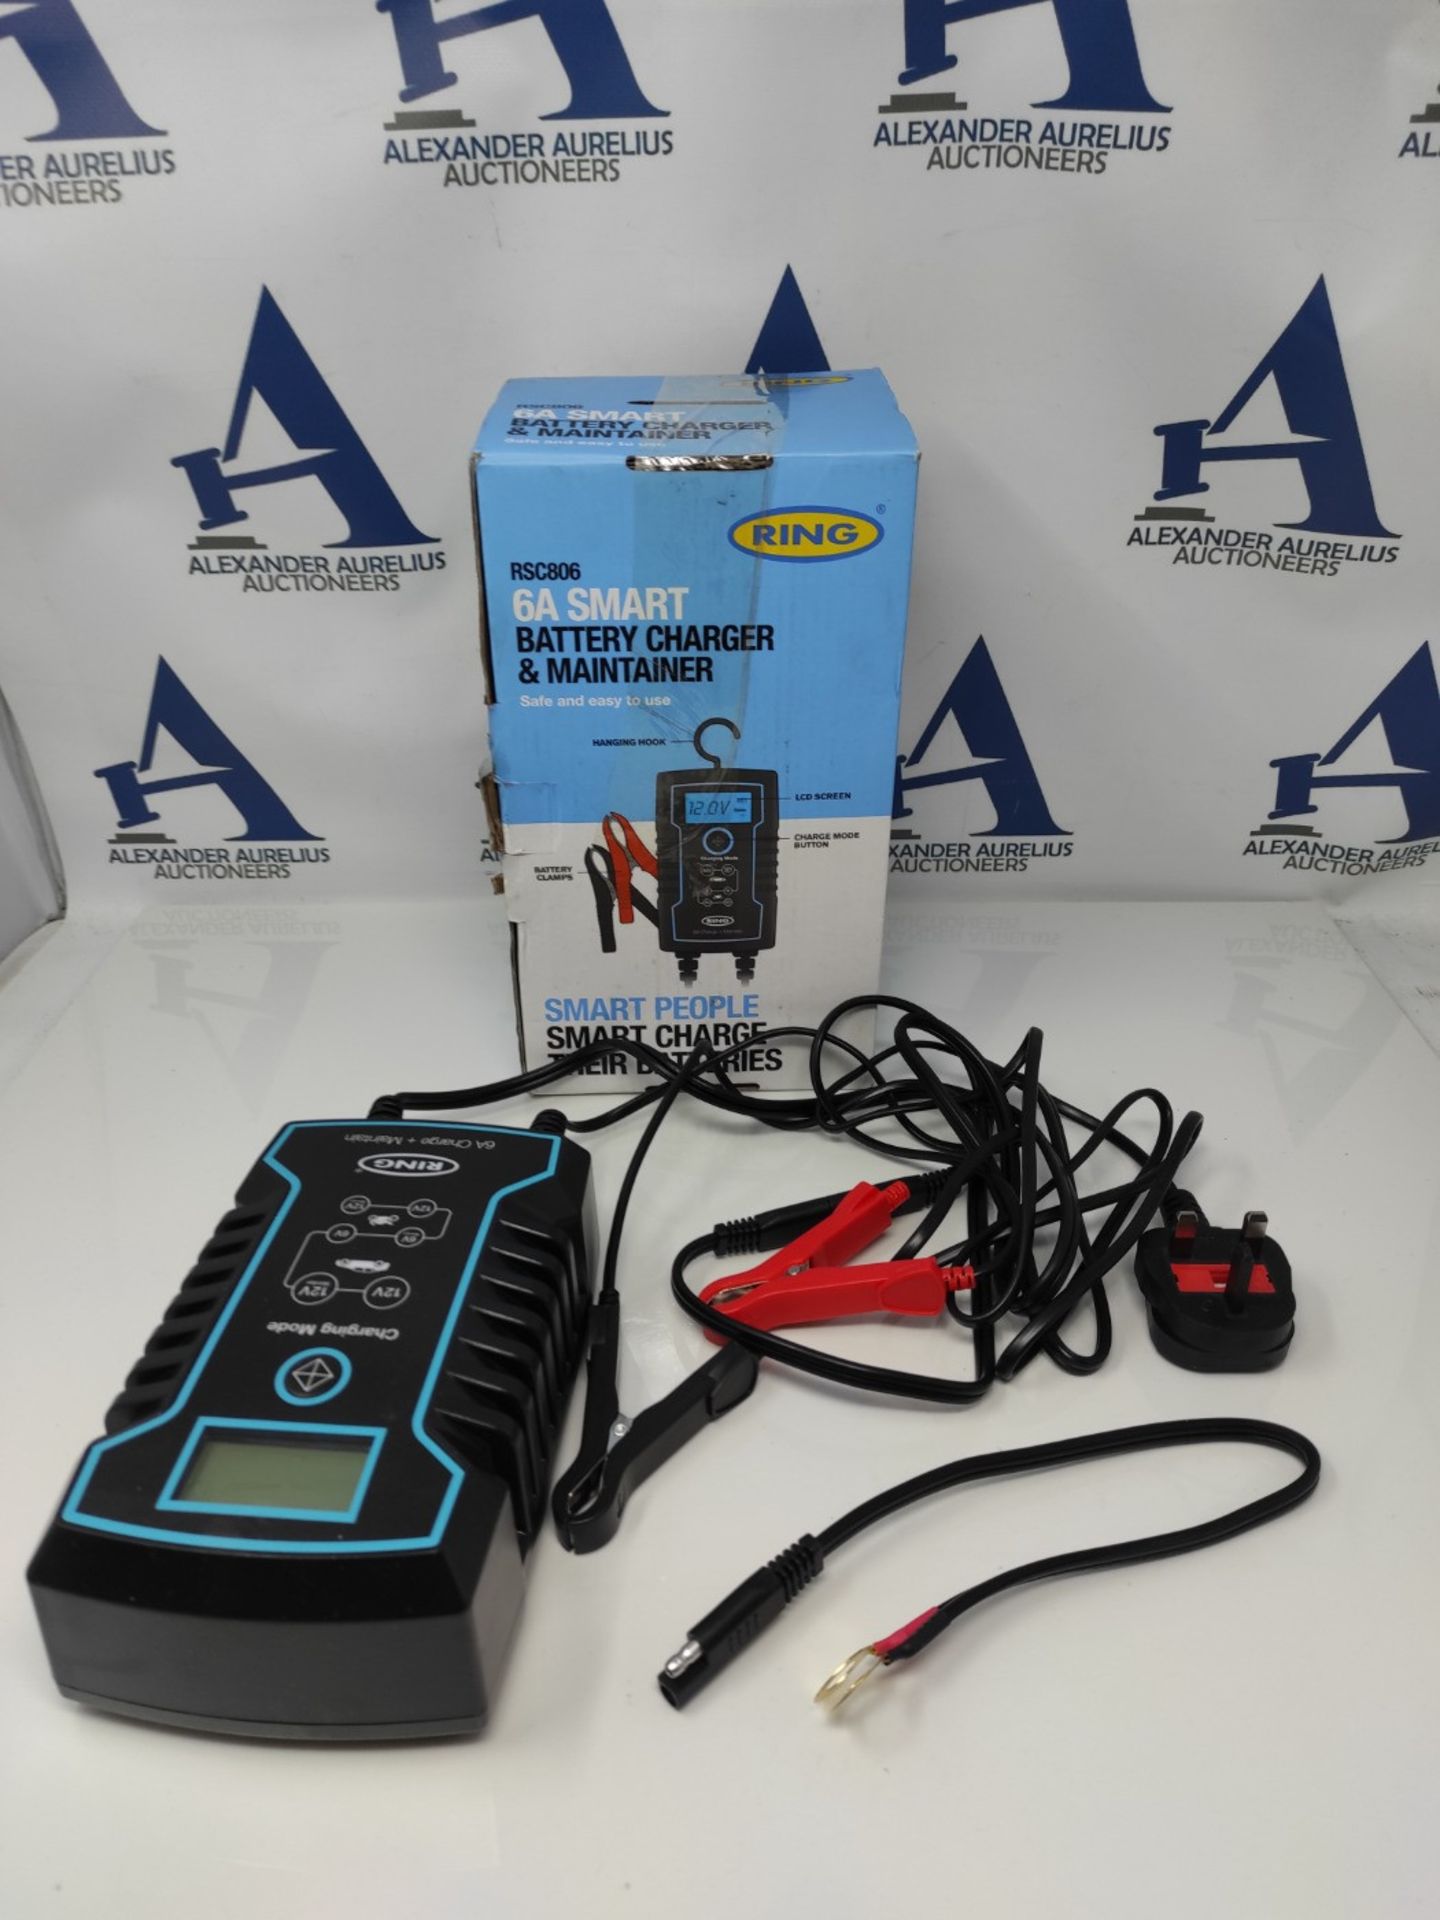 Ring RSC806, 6 Amp Battery Charger and Maintainer. 6V & 12V Smart Charger, Compatible - Bild 2 aus 2